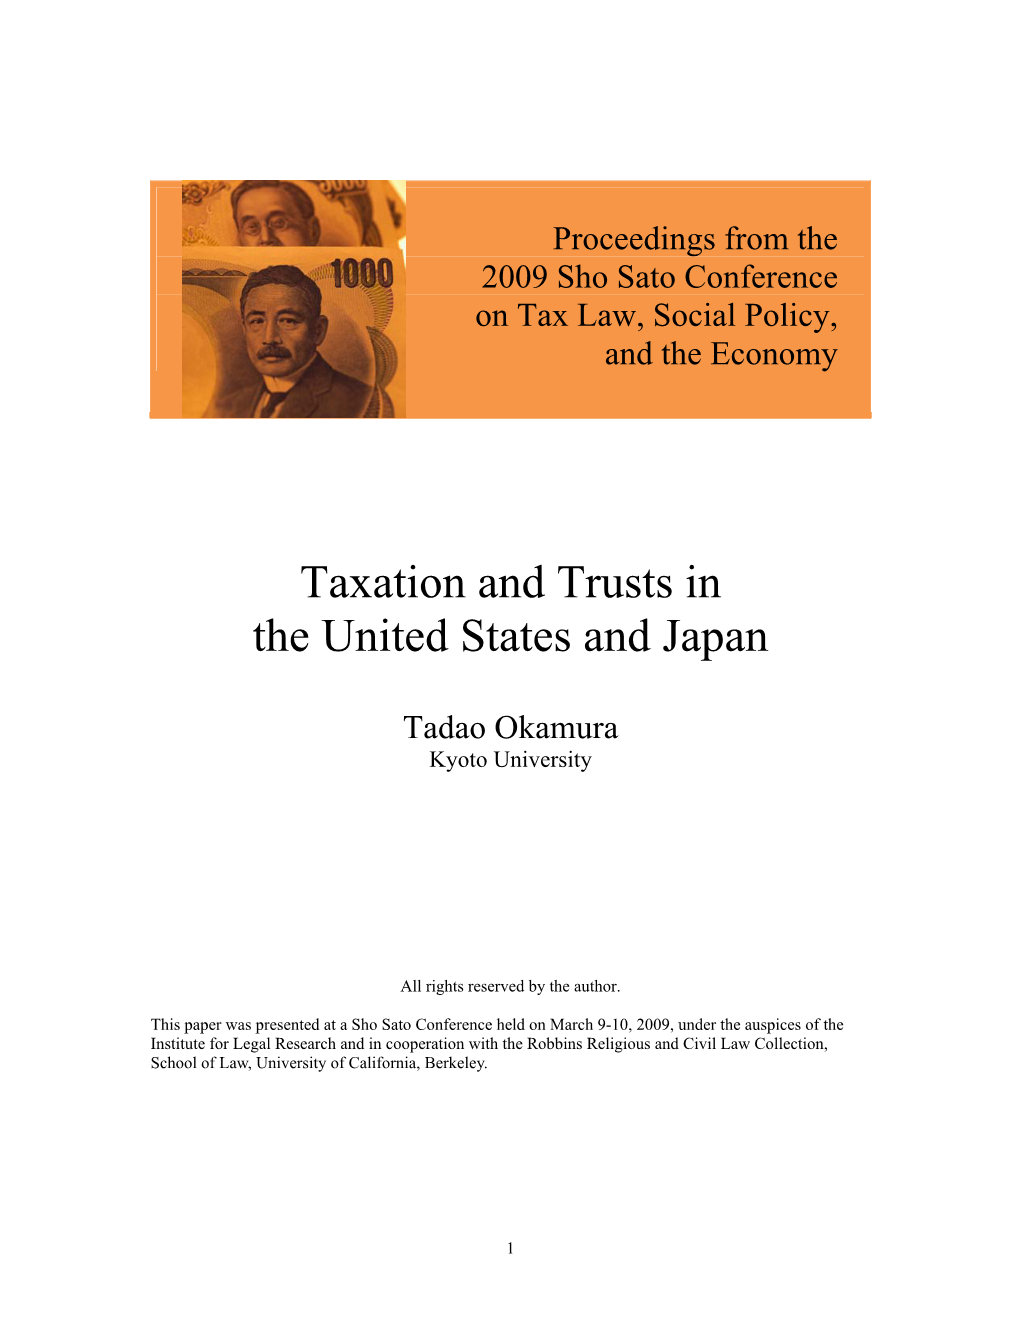 Taxation and Trusts in the United States and Japan